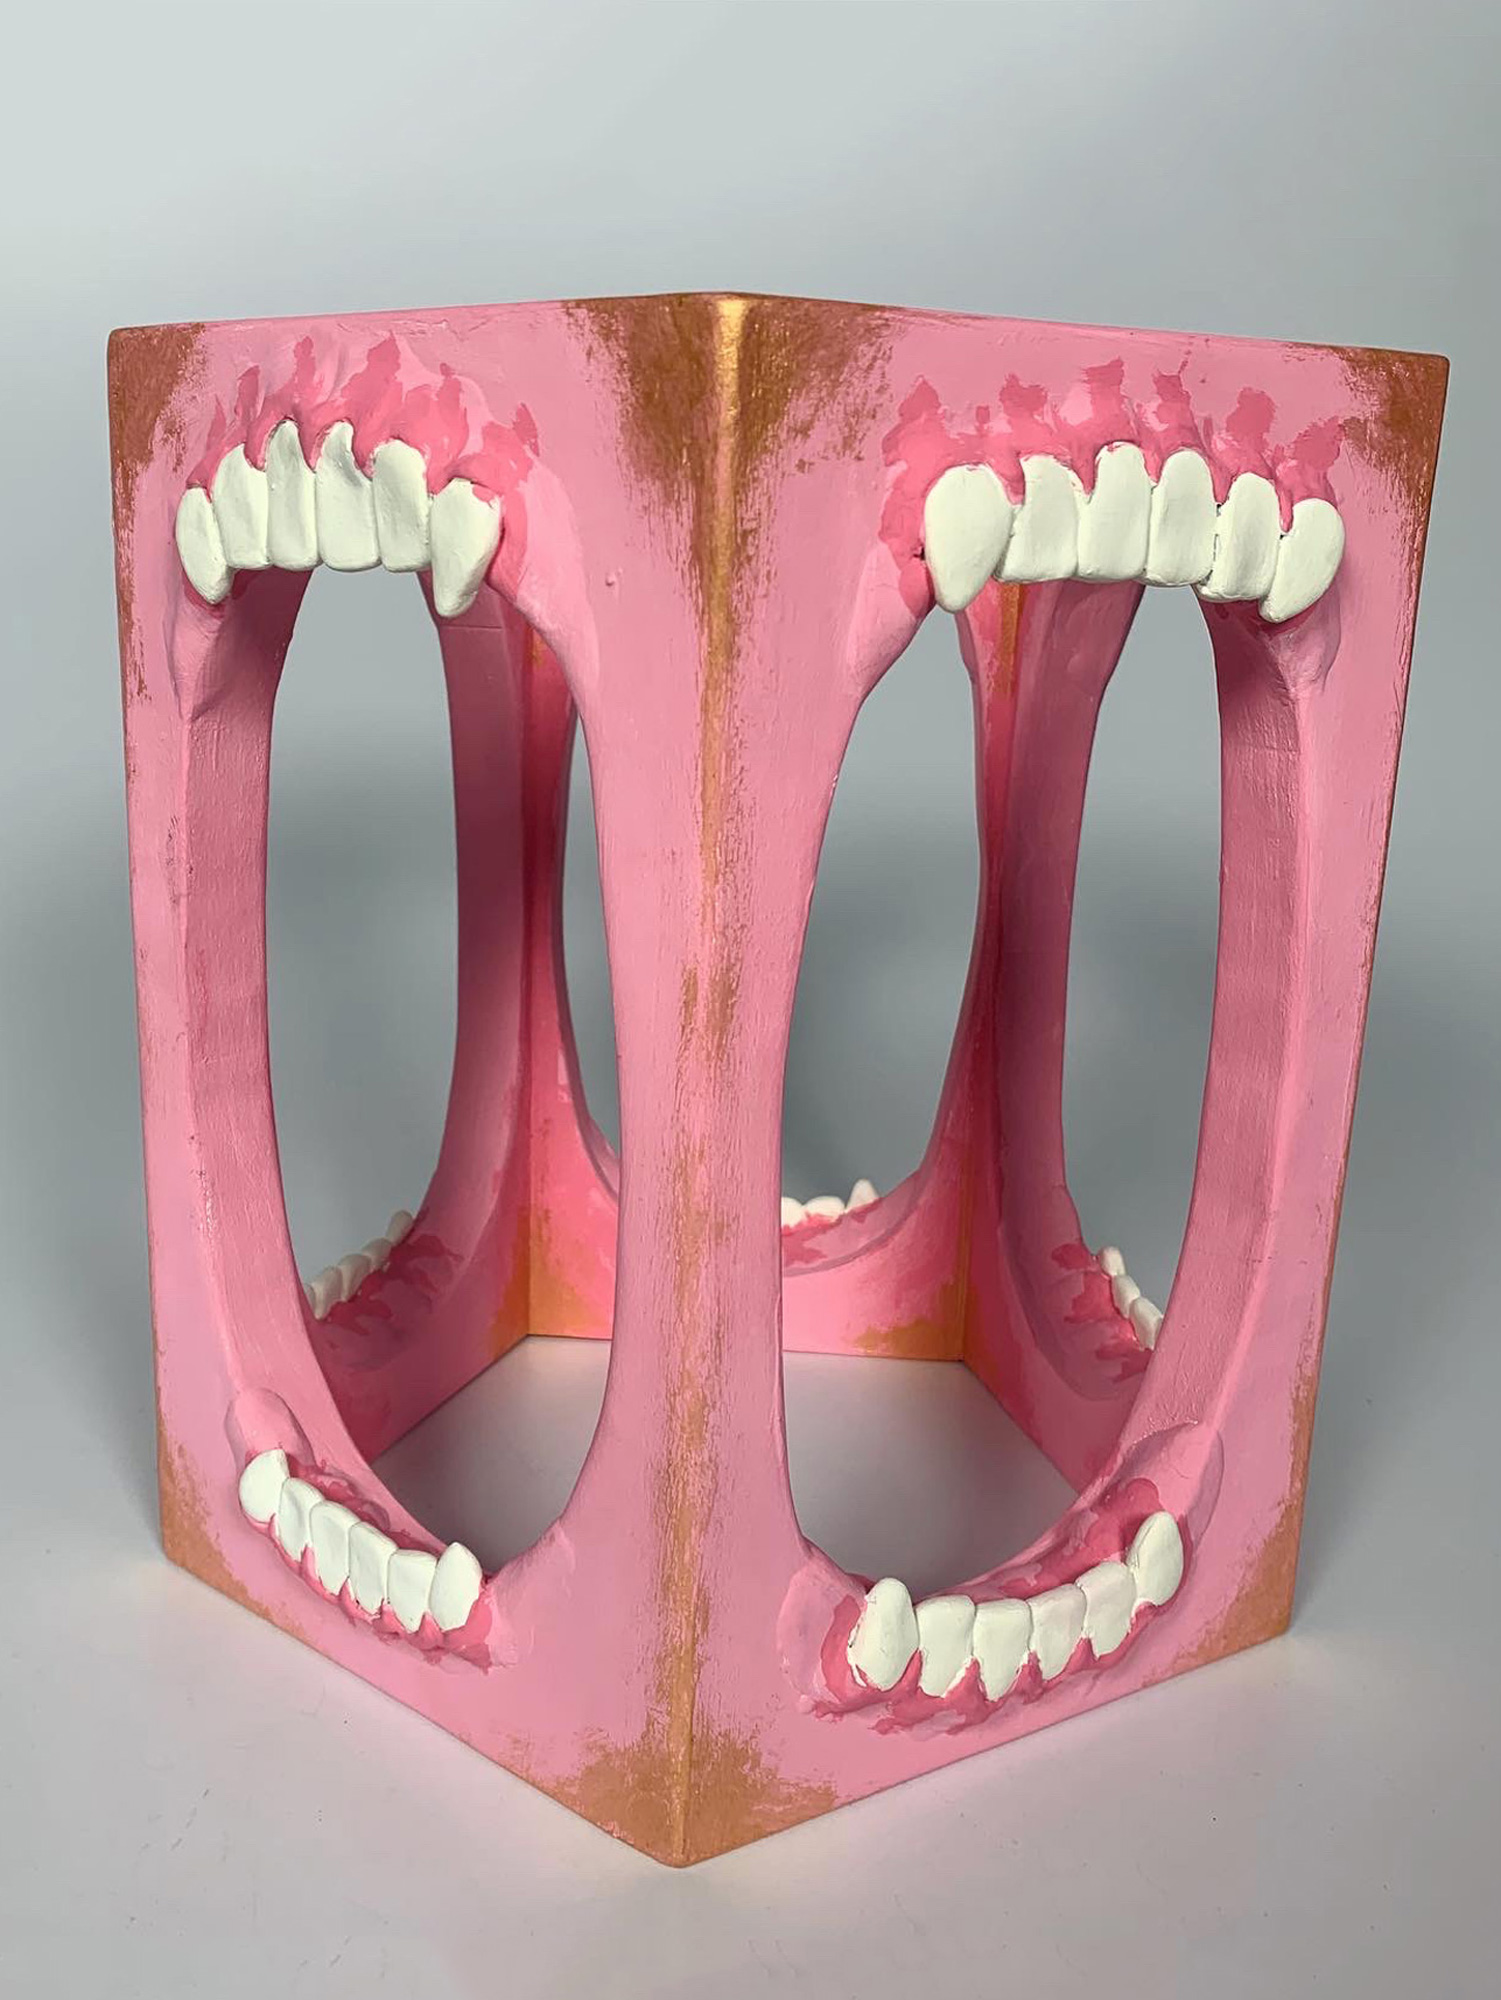 Sculpture of teeth and gums